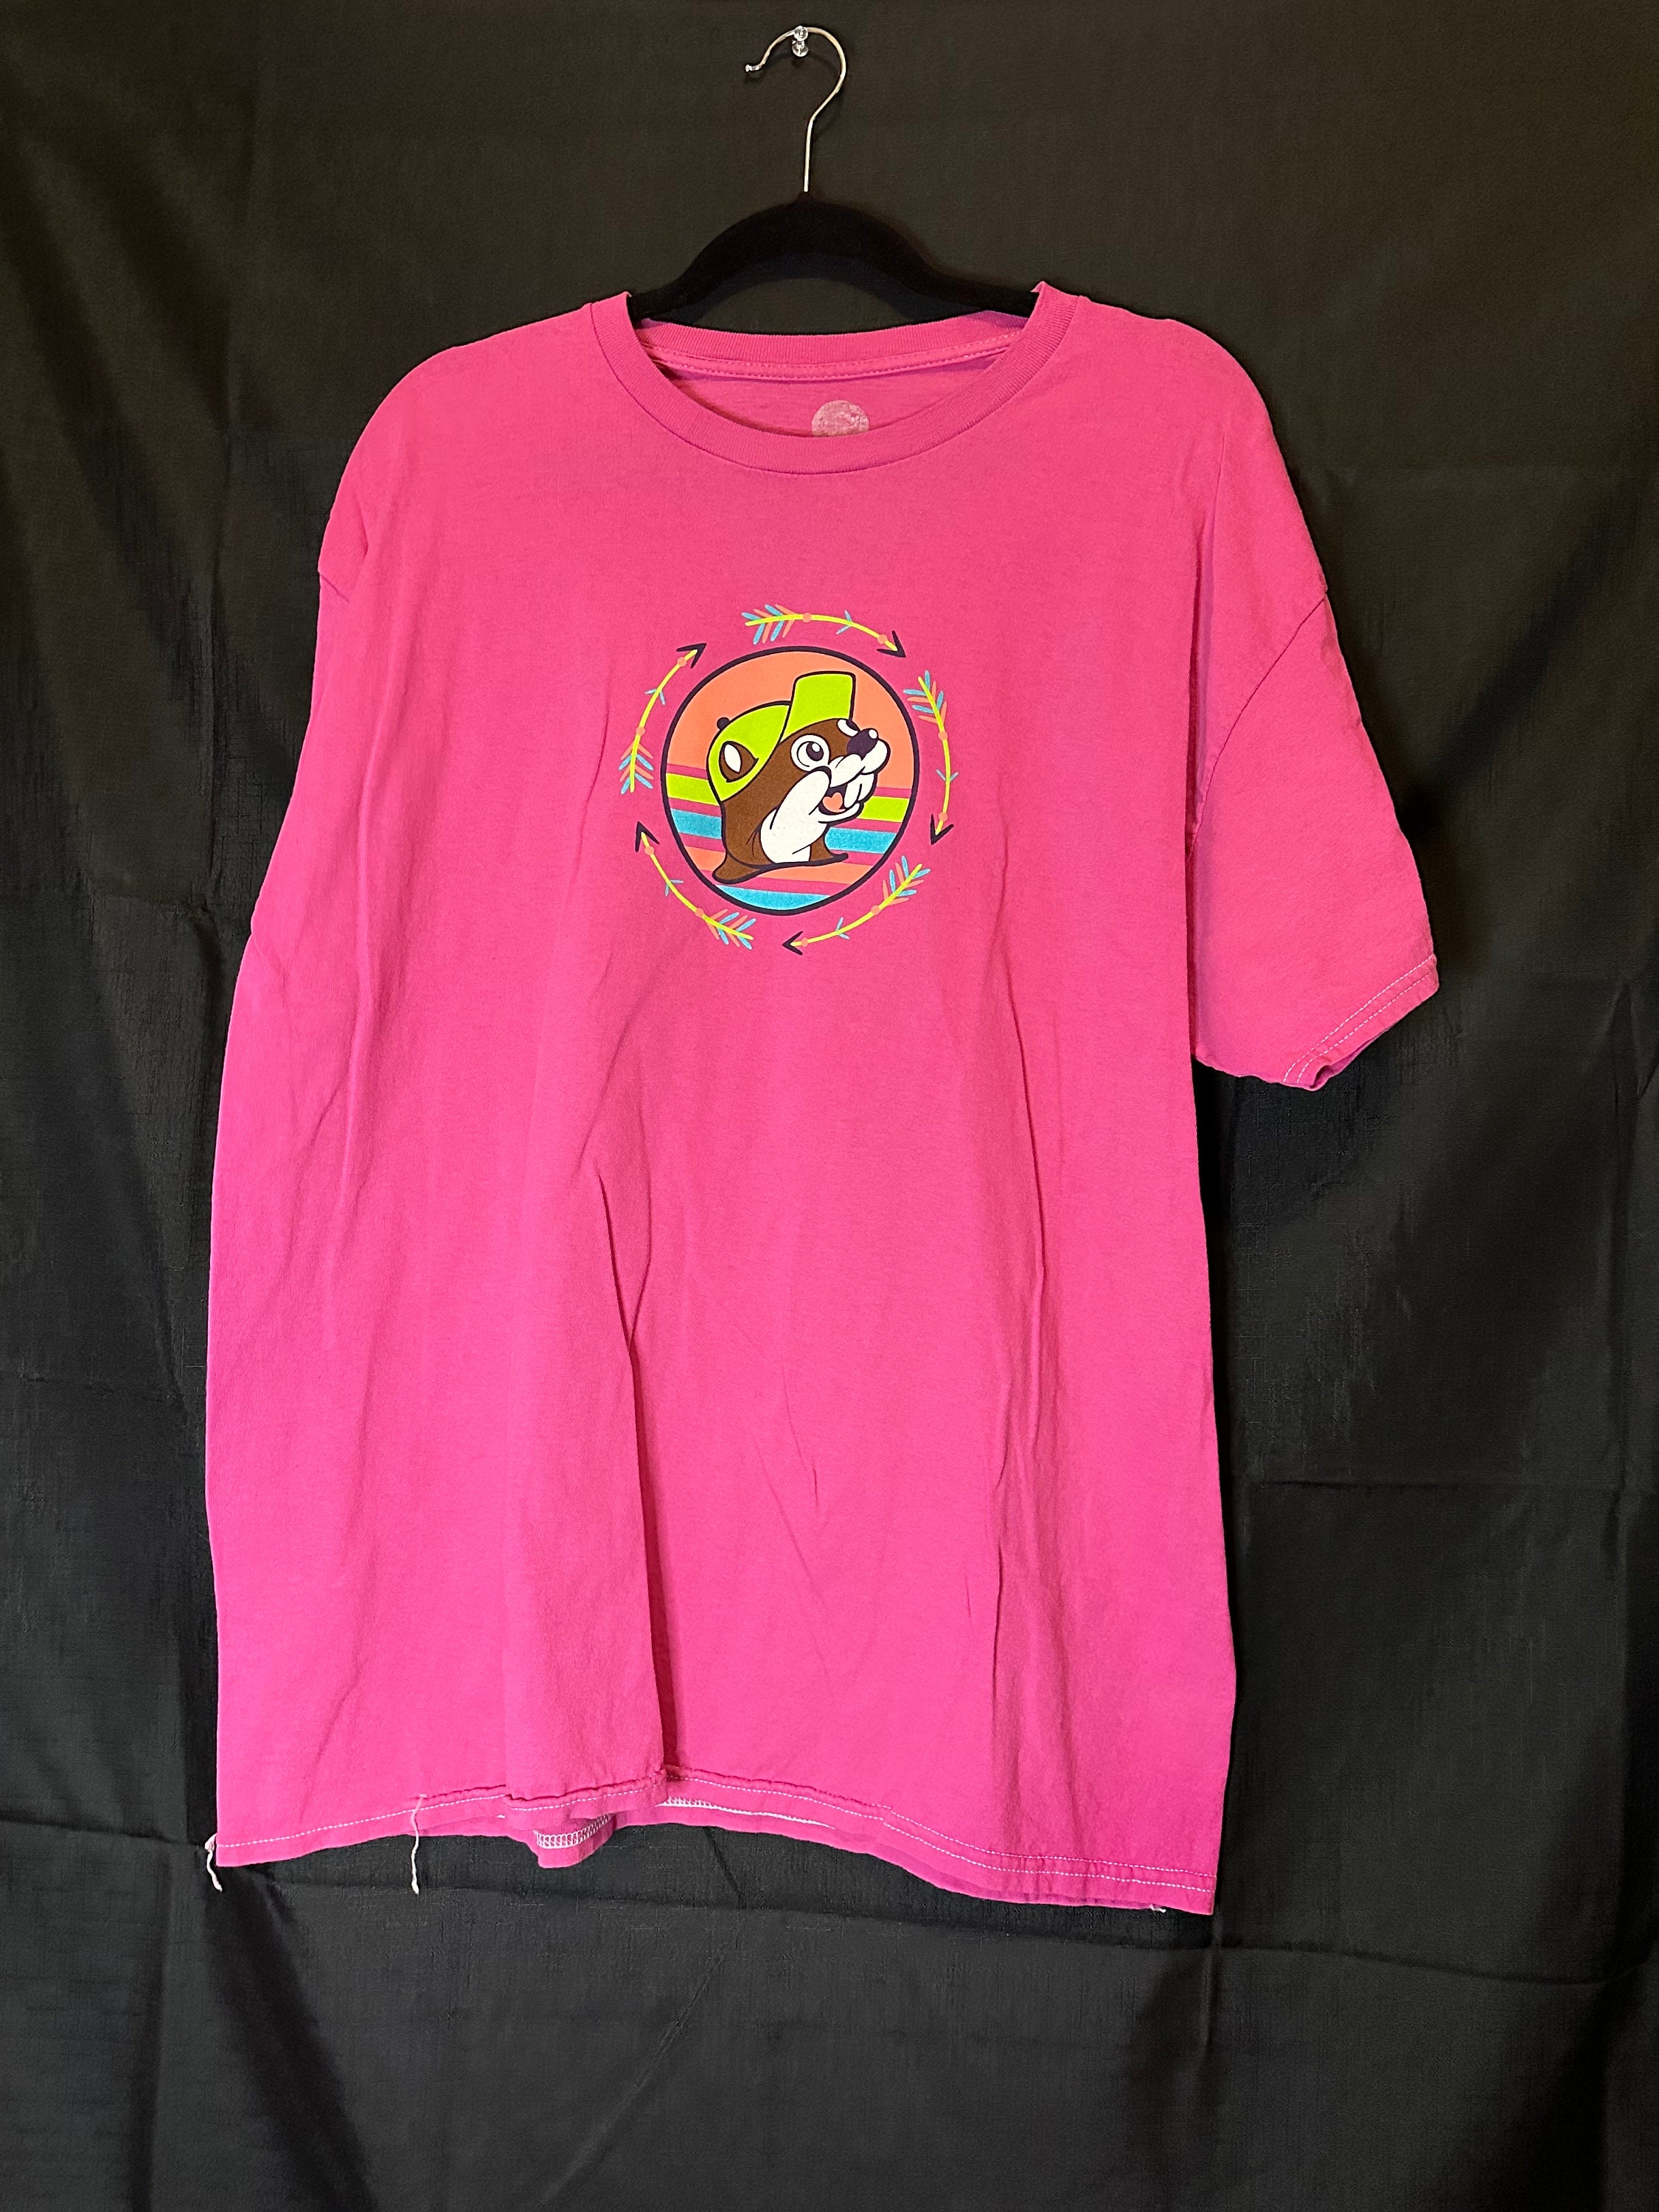 Buc-ees Shirt Pink - Etsy